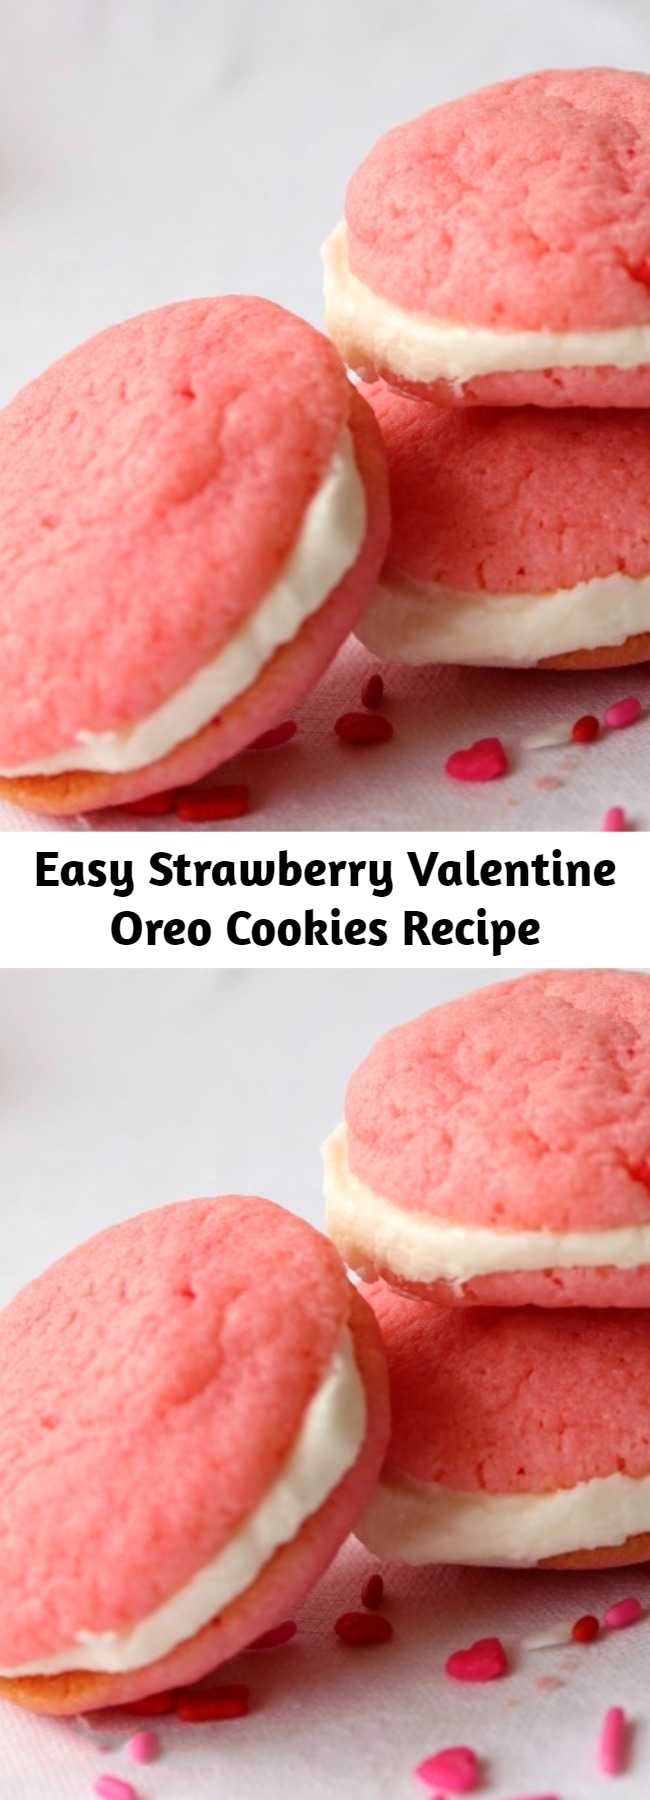 These Strawberry Valentine Oreo Cookies are easy to make and full of delicious strawberry flavor. You are going to love these yummy and simple cookies.